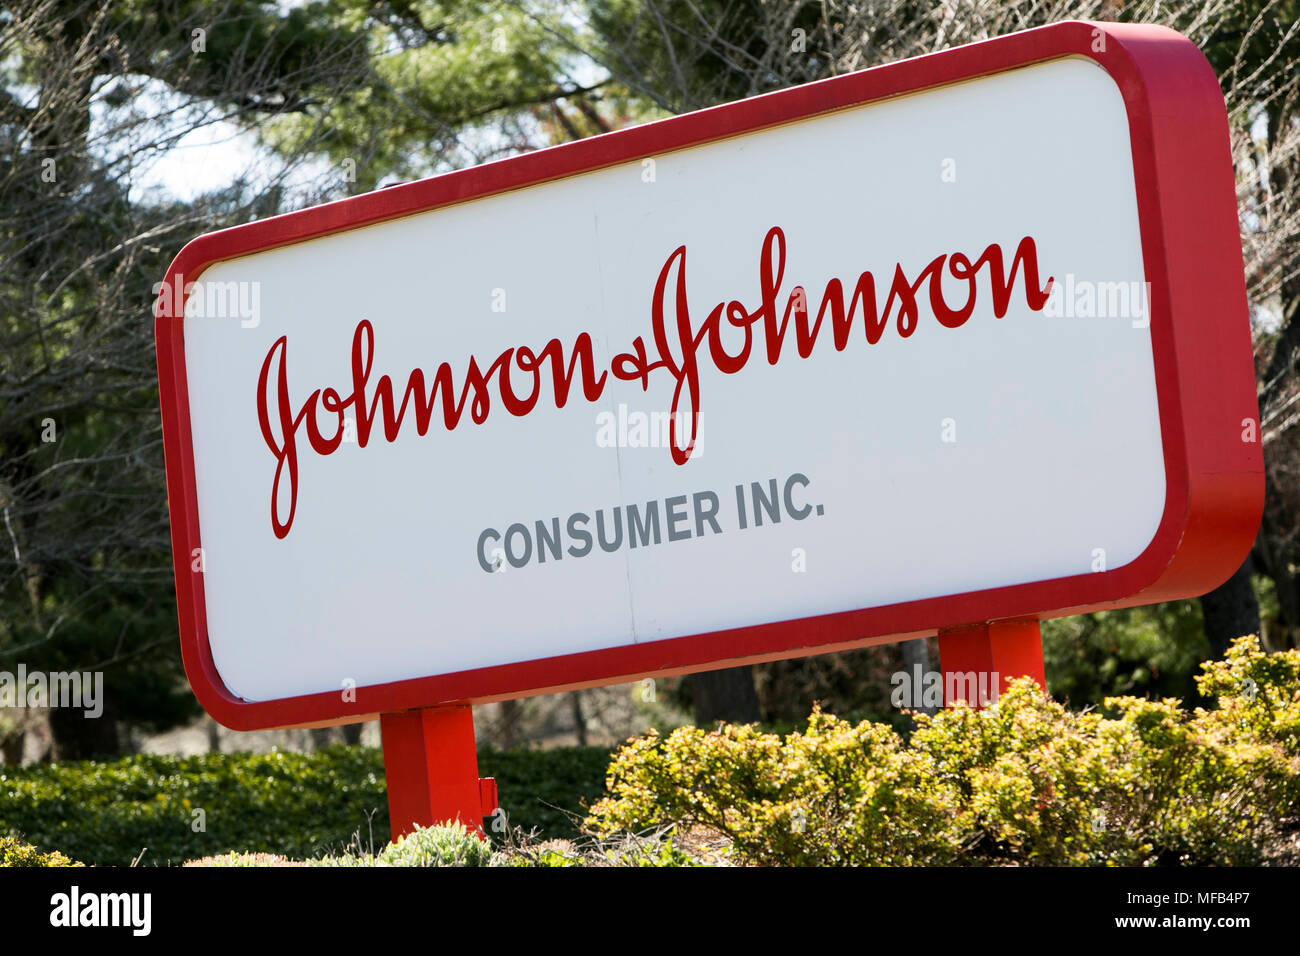 A logo sign outside of a facility occupied by the Johnson & Johnson consumer division in Fort Washington, Pennsylvania on April 22, 2018. Stock Photo